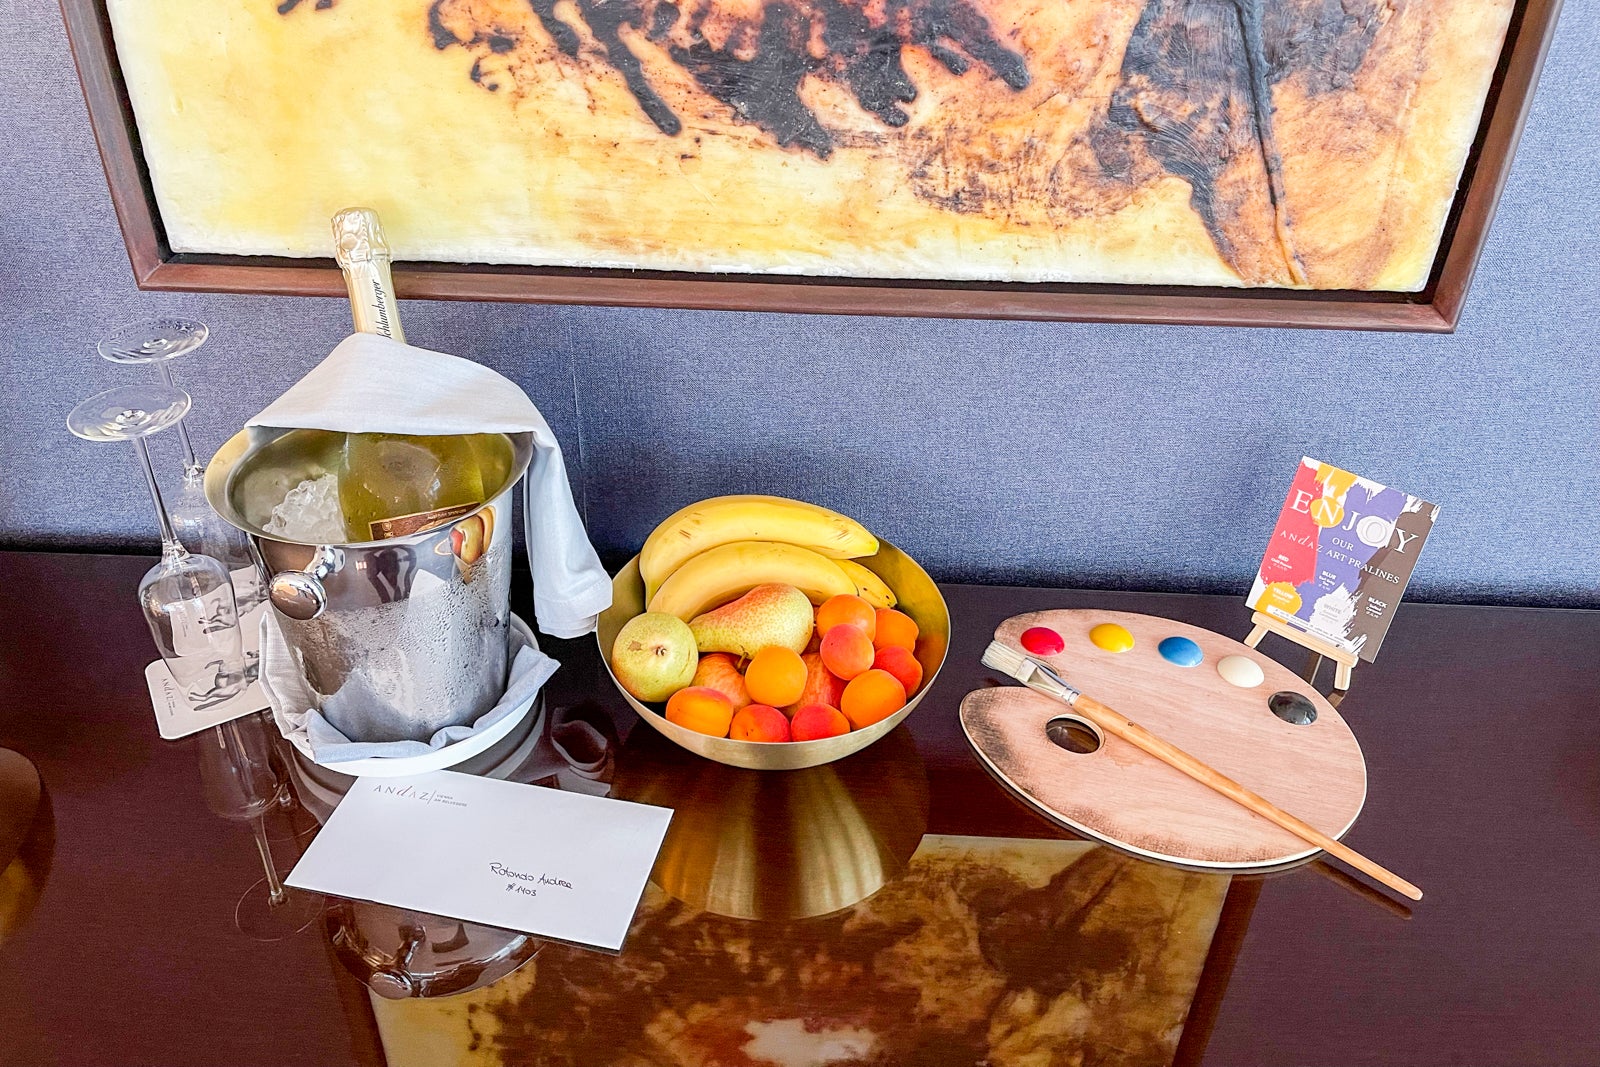 Andaz Vienna welcome amenity for Globalists on a Hyatt Prive rate: fruit, sparkling wine and chocolate